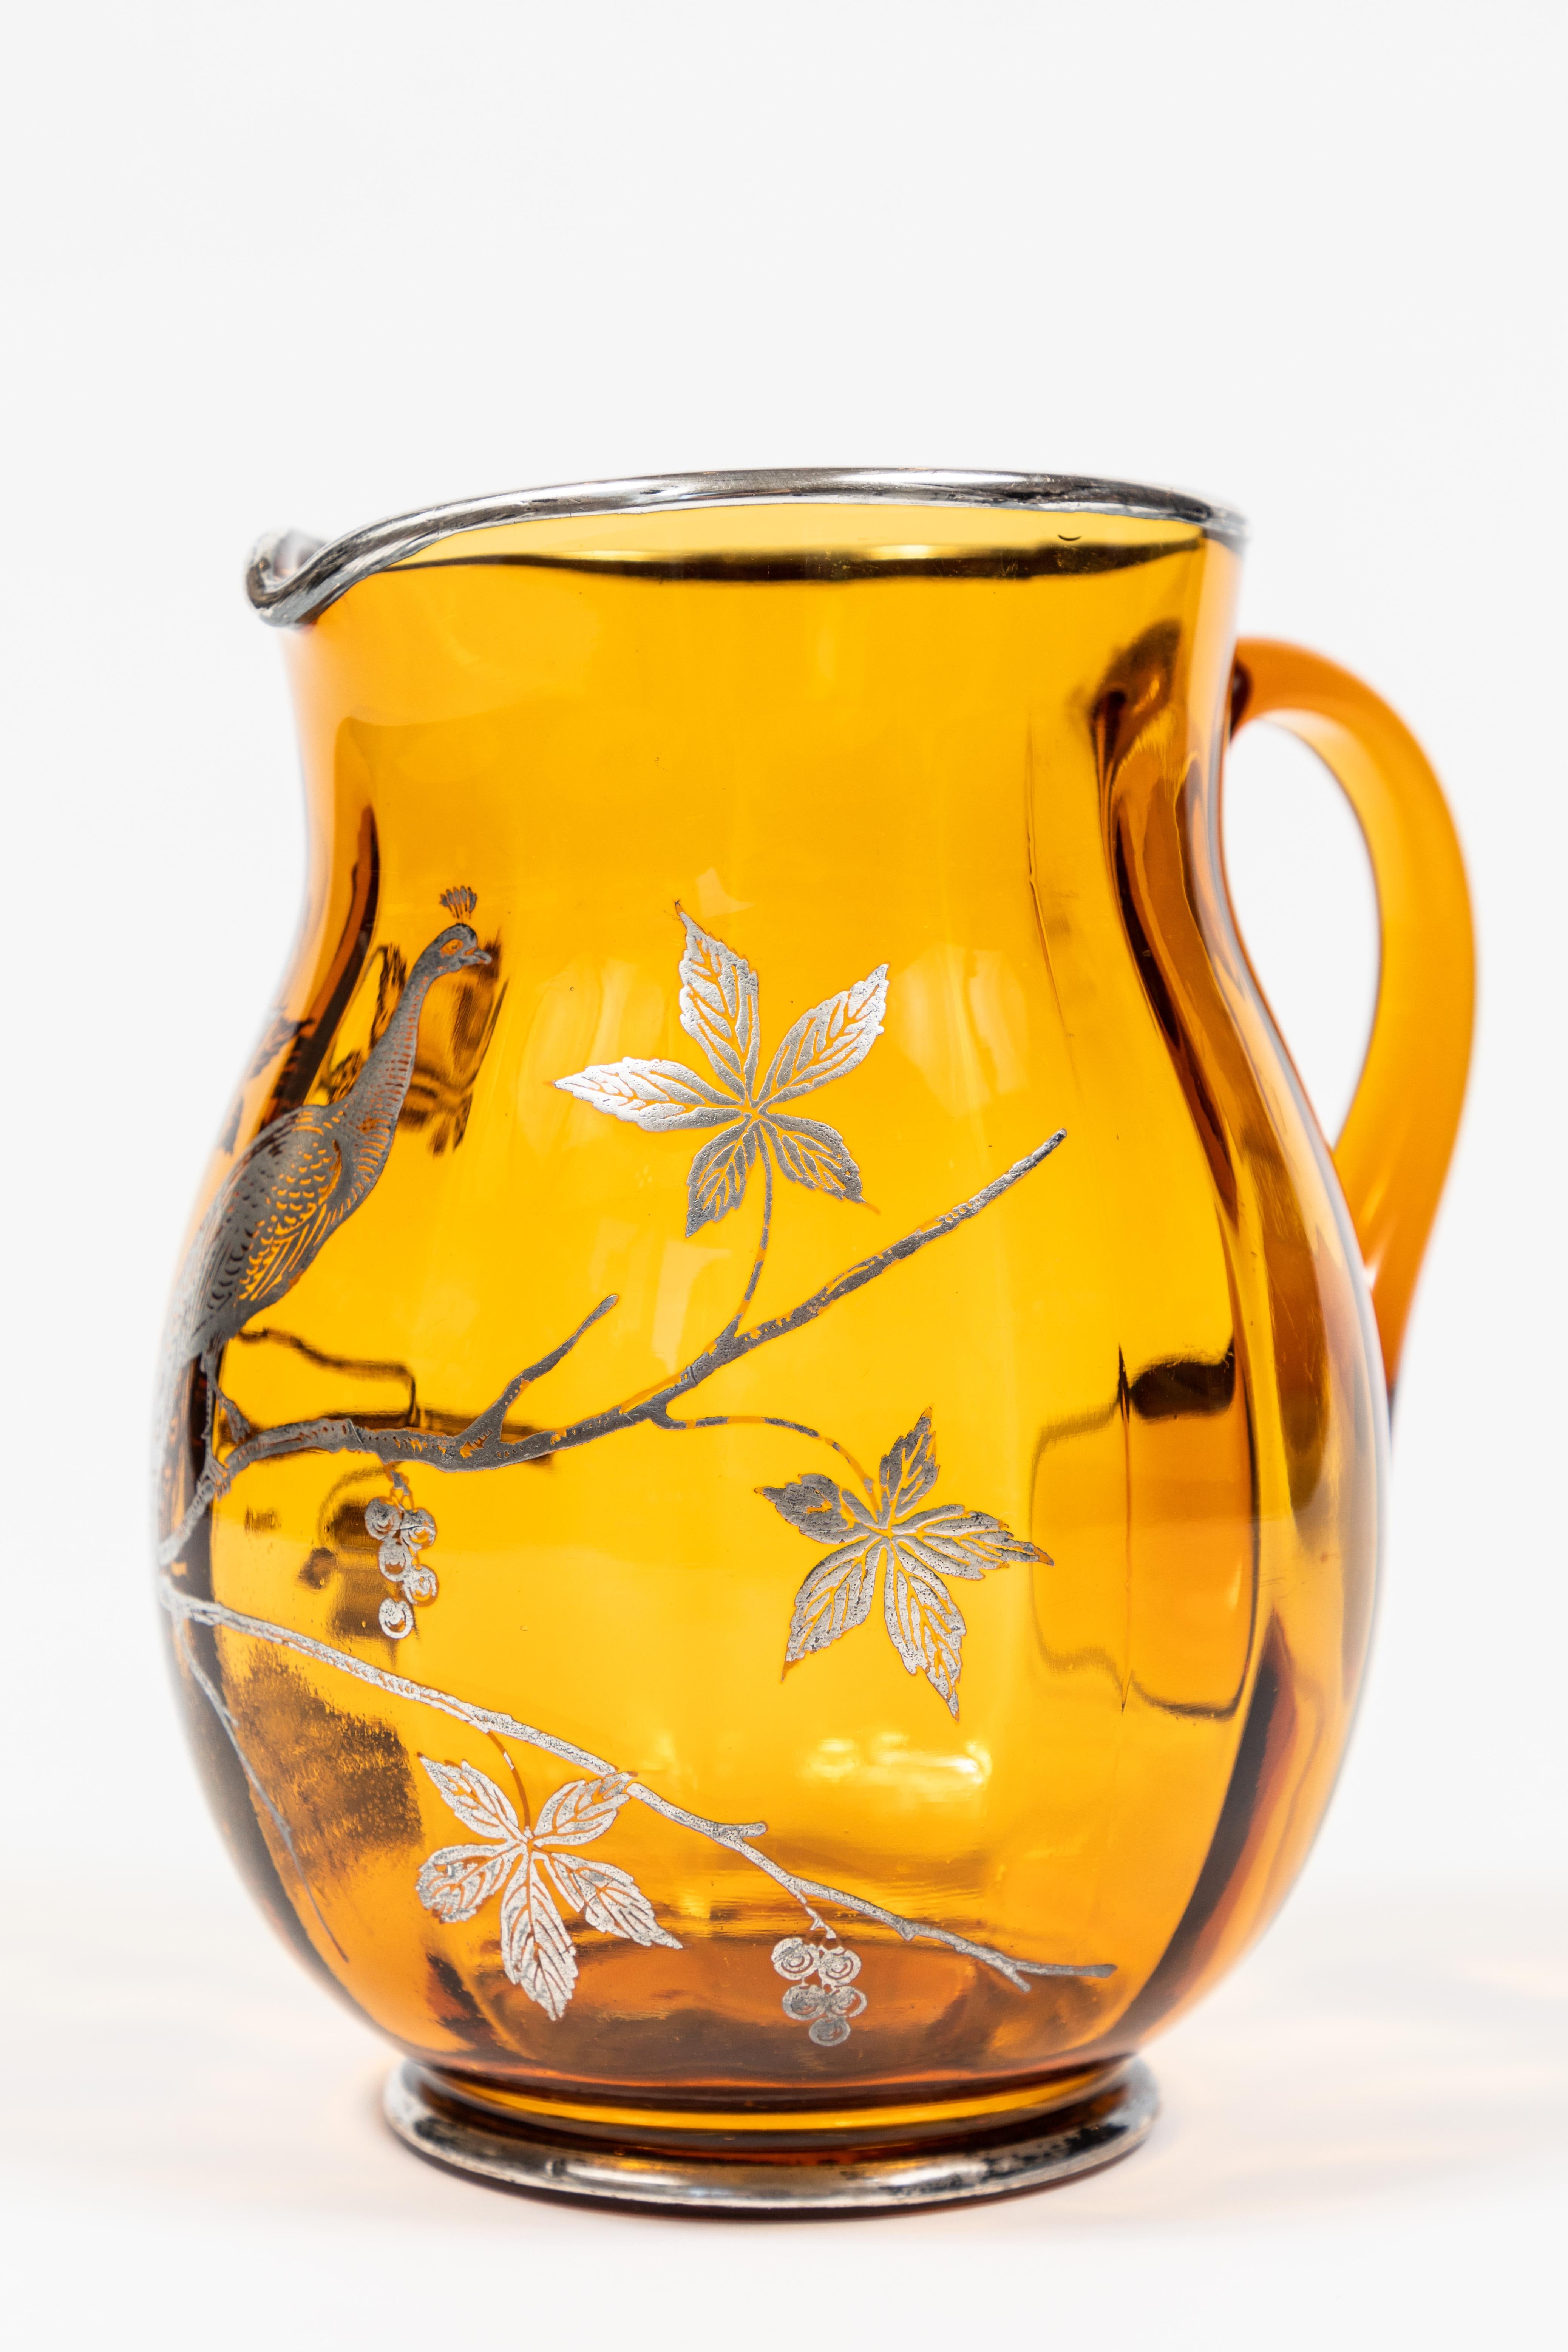 Vintage amber glass pitcher with sterling silver overlay of peacock on a branch. Pitcher is marked 'sterling', as shown in photo.